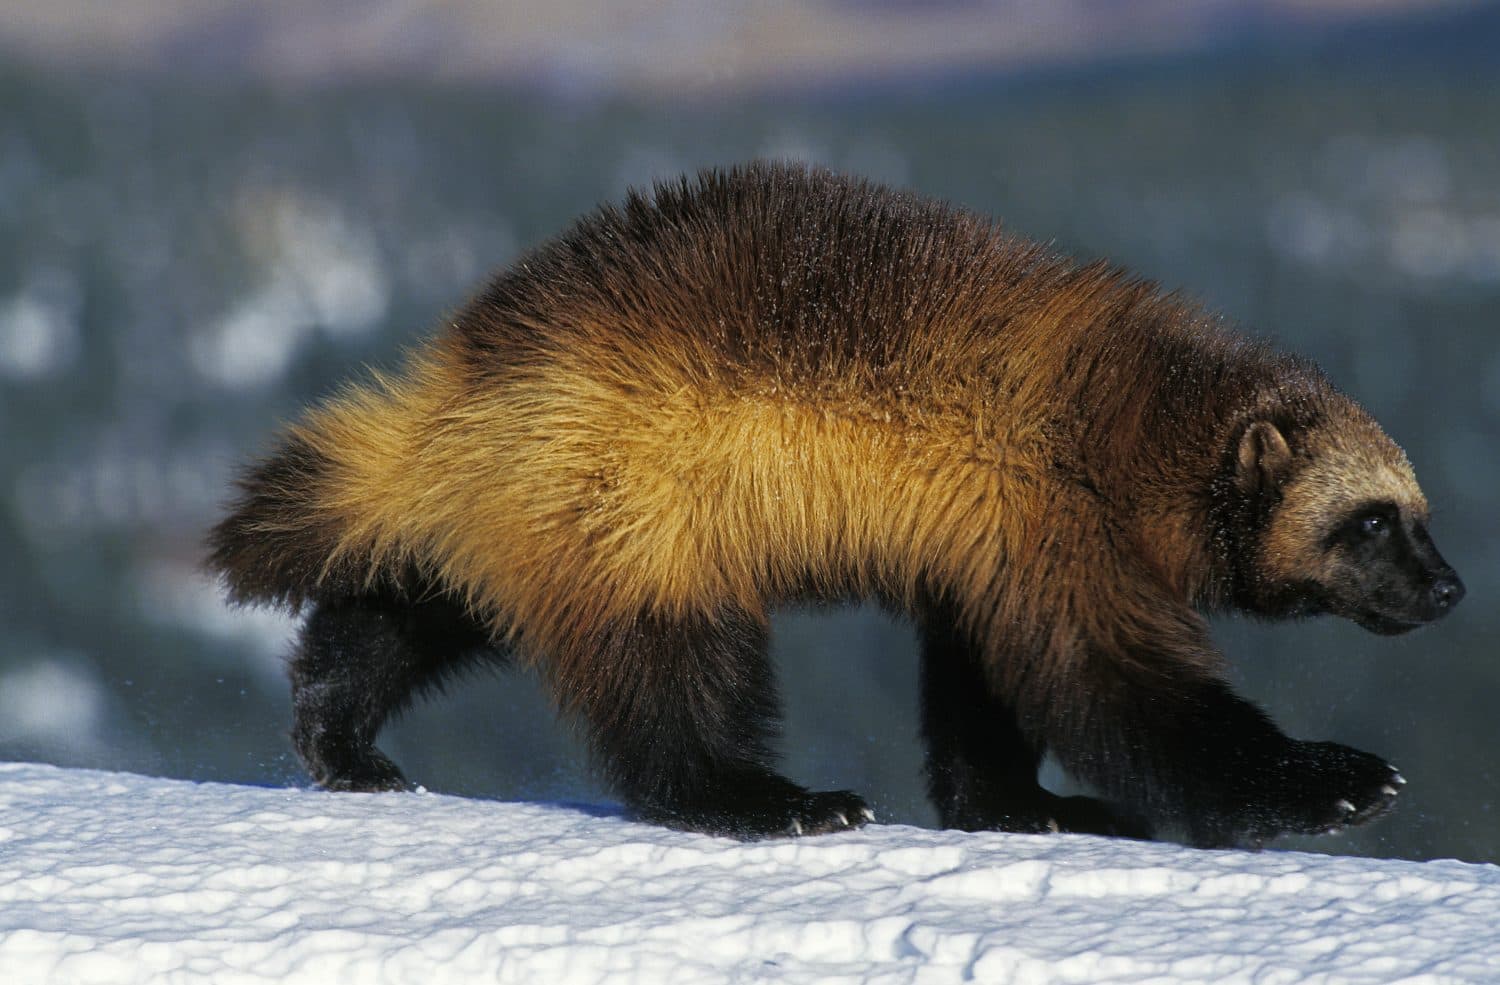 North American Wolverine, gulo gulo luscus, Adult standing on Snow, Canada  